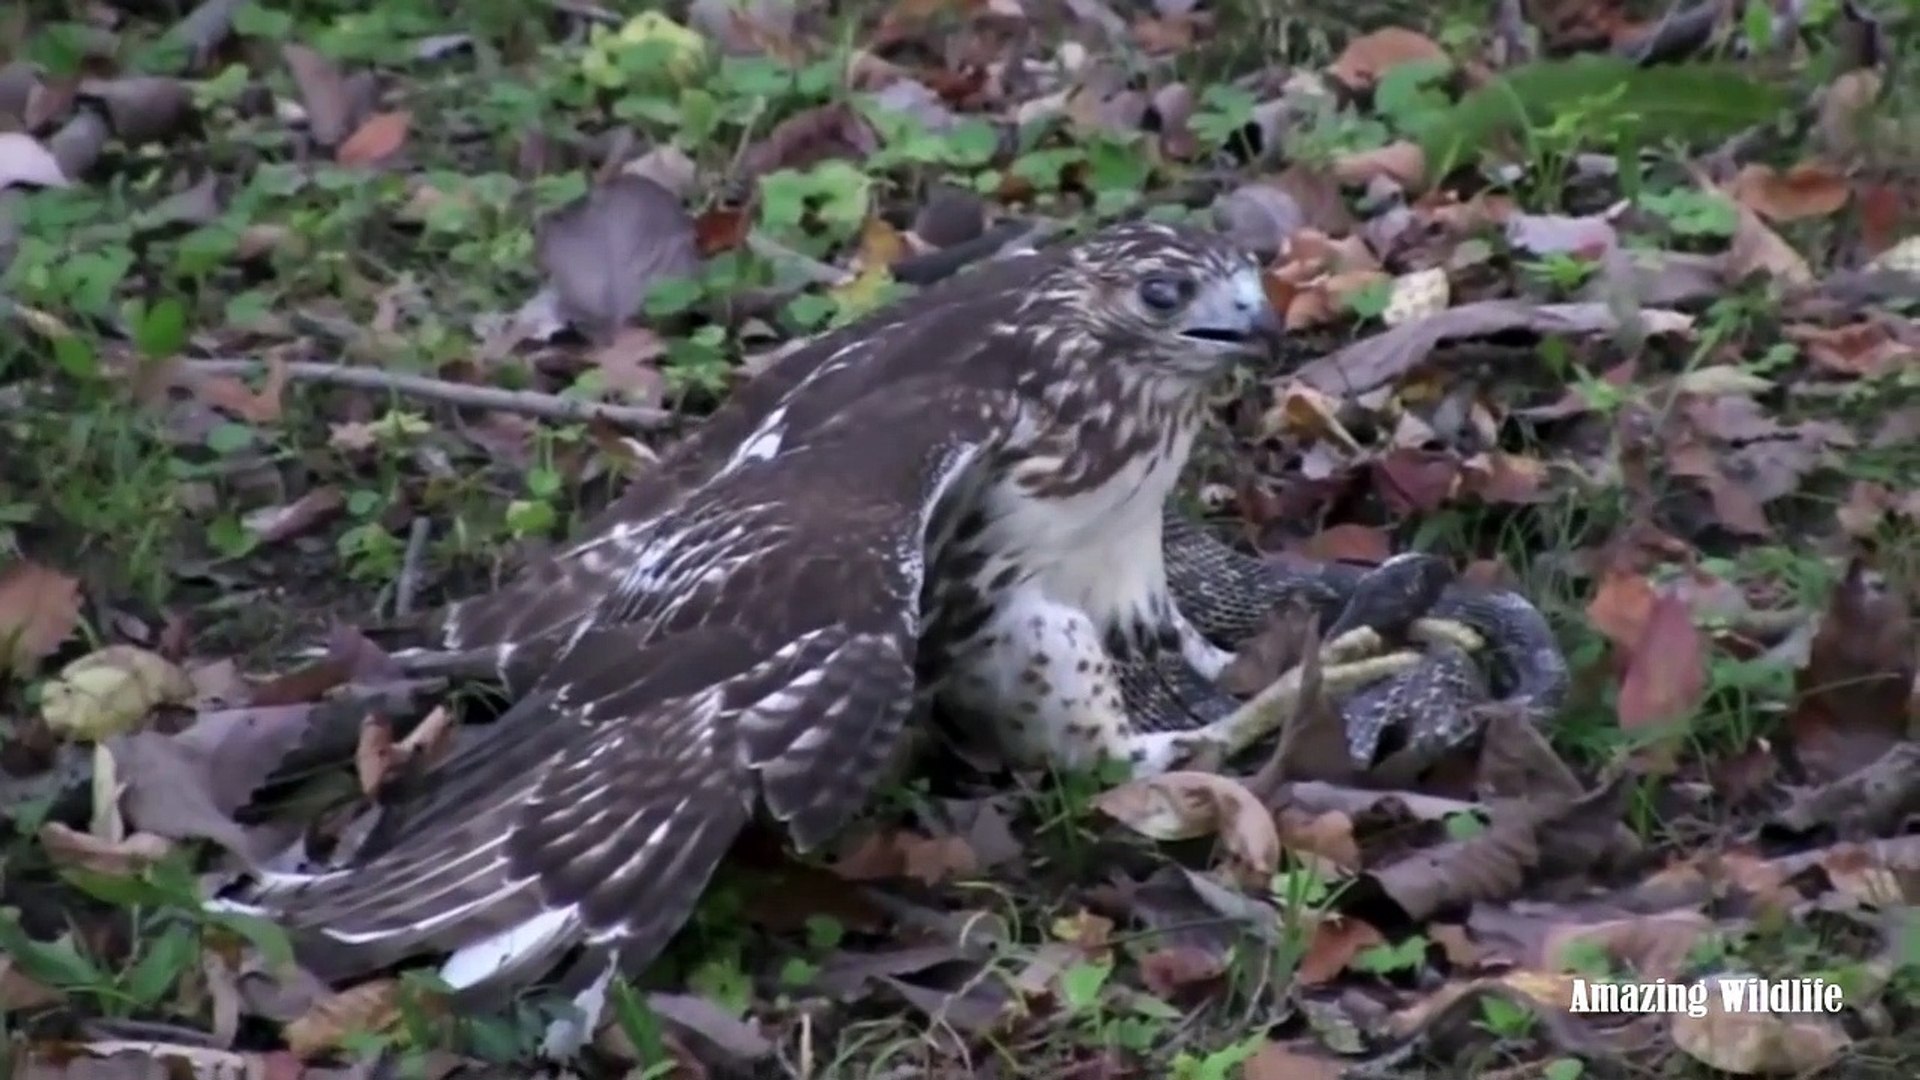 Red Tailed Hawk attacks and kills a Snake | Animals fight to the death